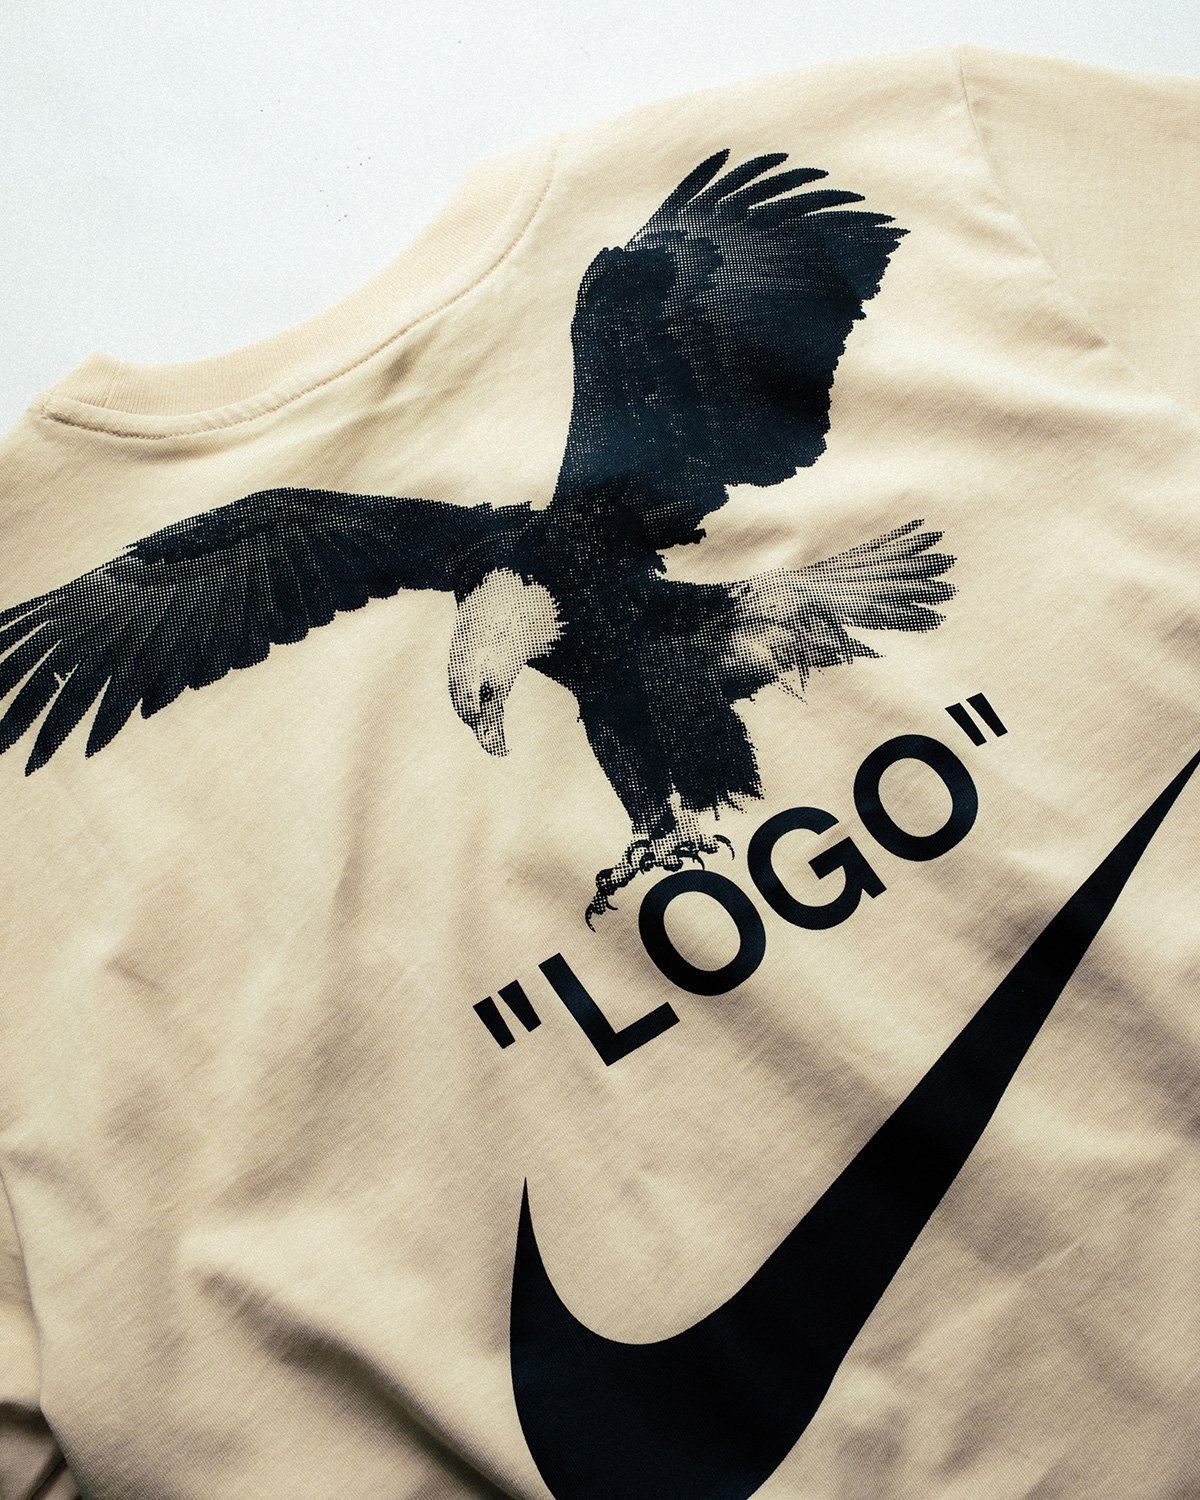 atmos USA X: "Nike x Off-White NRG A6 Tee is now available in-store. The tee featured faux tux screen print with “LOGO” and Swoosh branding on front and eagle with “LOGO”